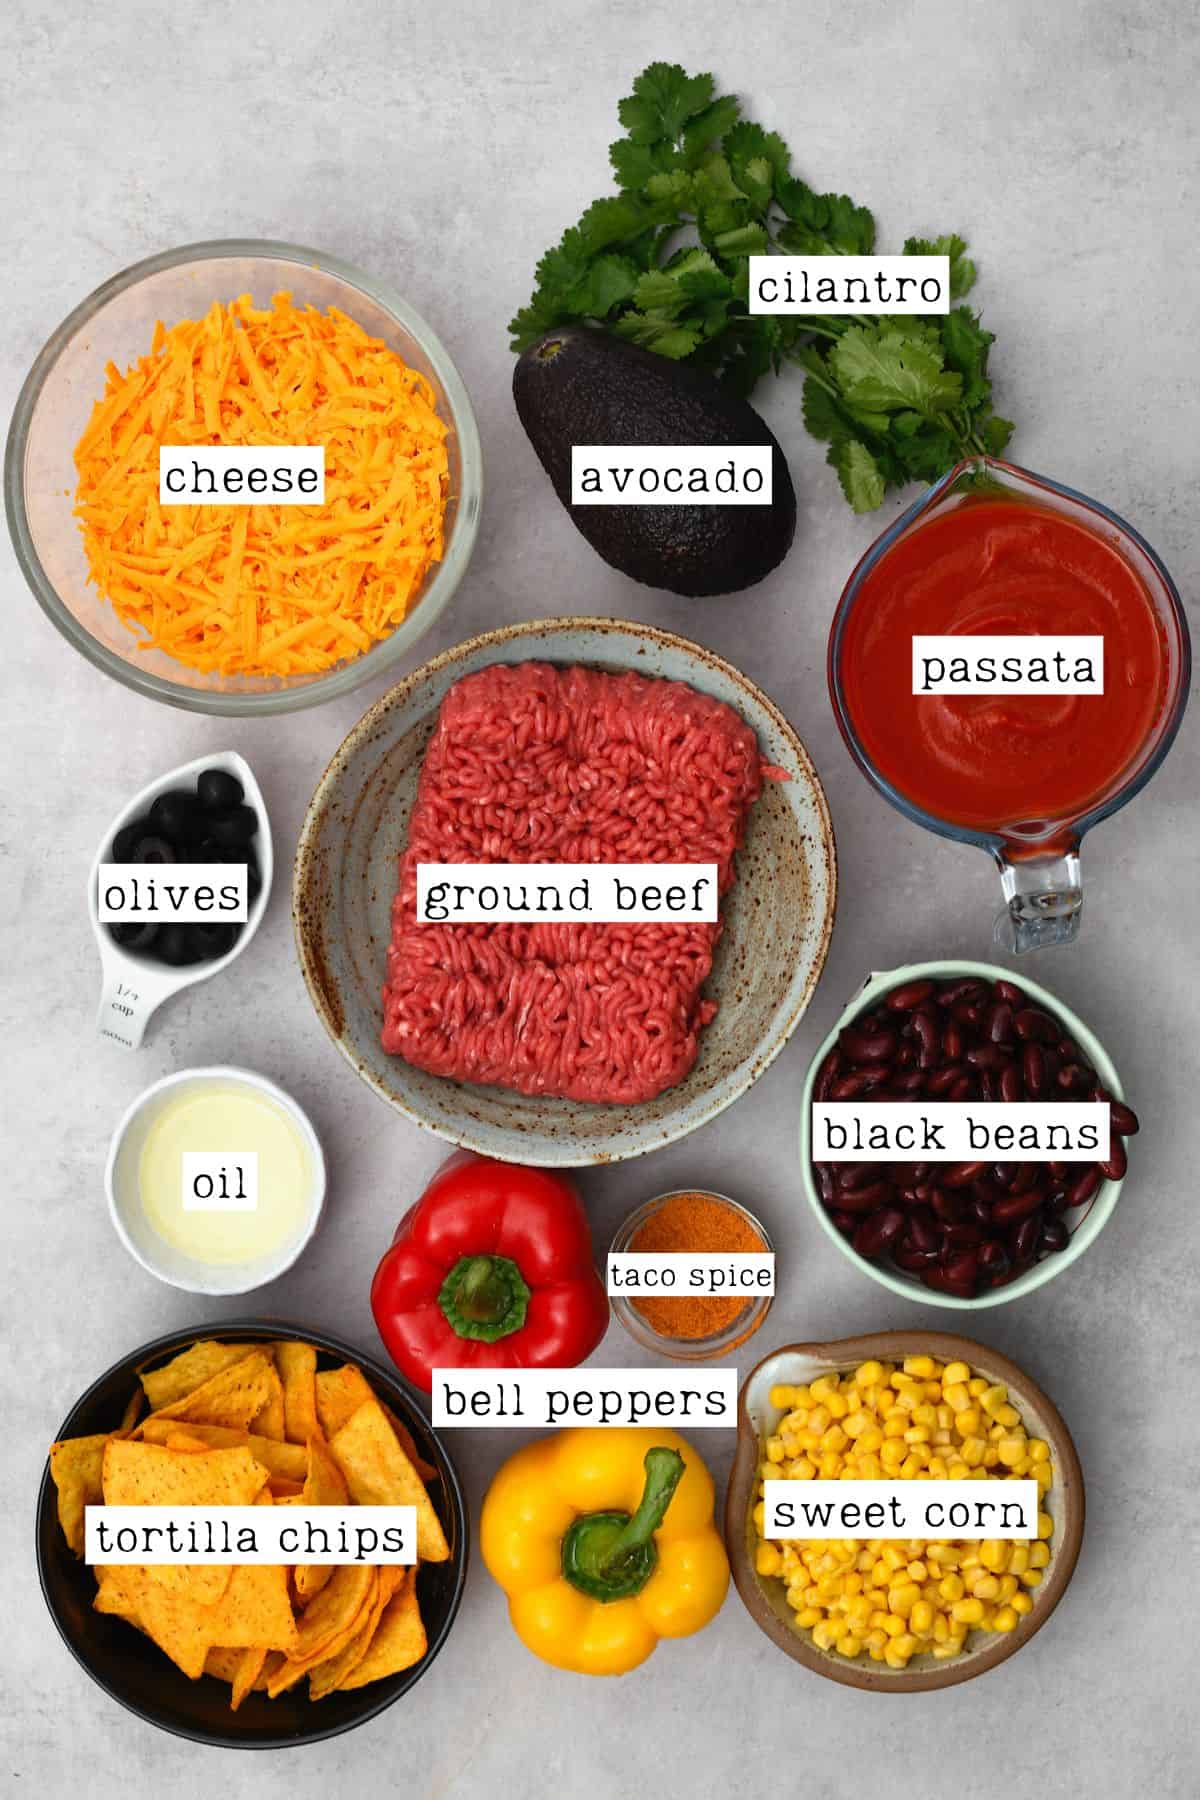 Ingredients for taco casserole